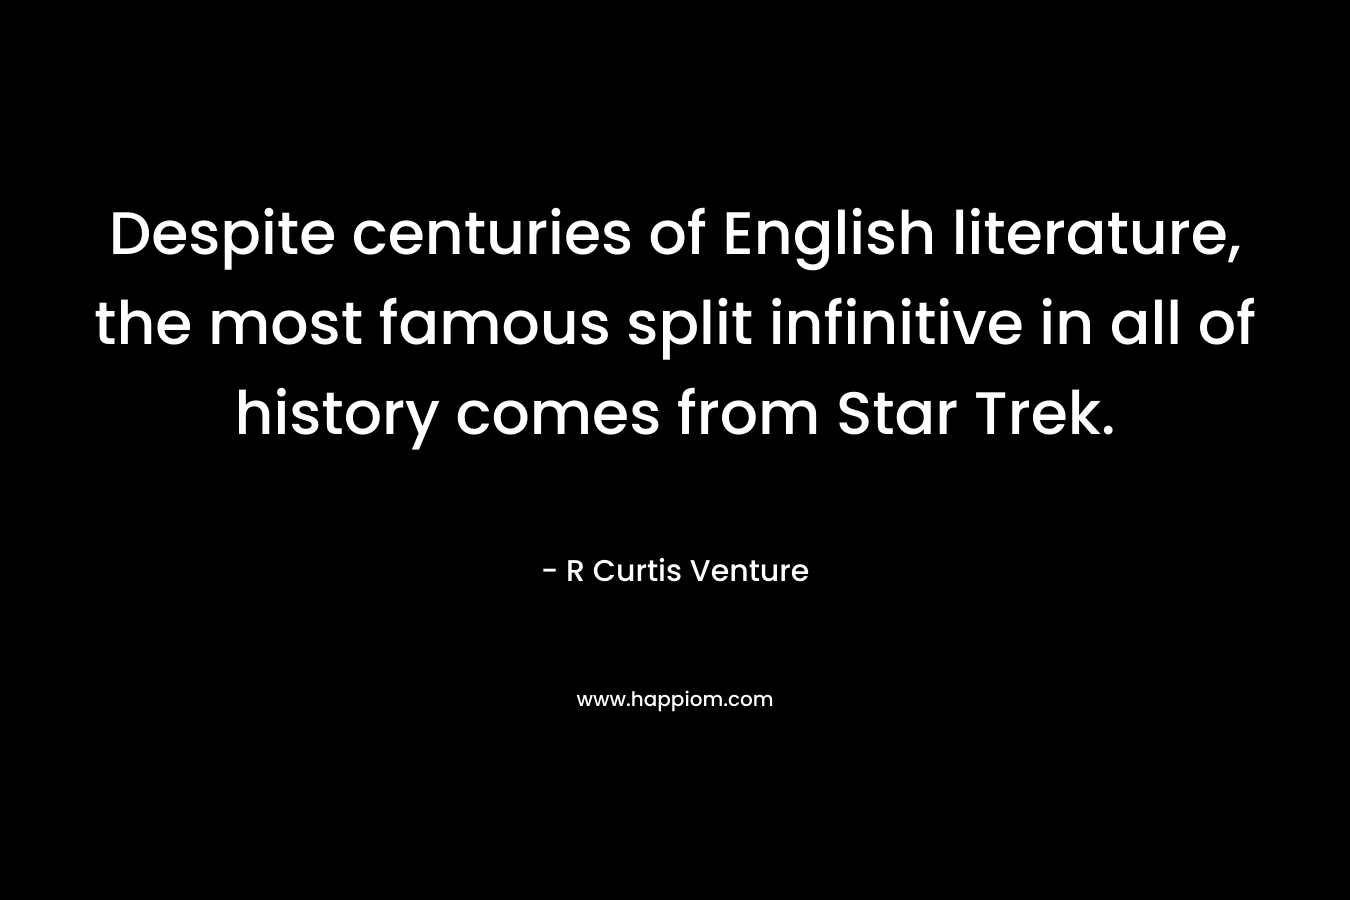 Despite centuries of English literature, the most famous split infinitive in all of history comes from Star Trek. – R Curtis Venture